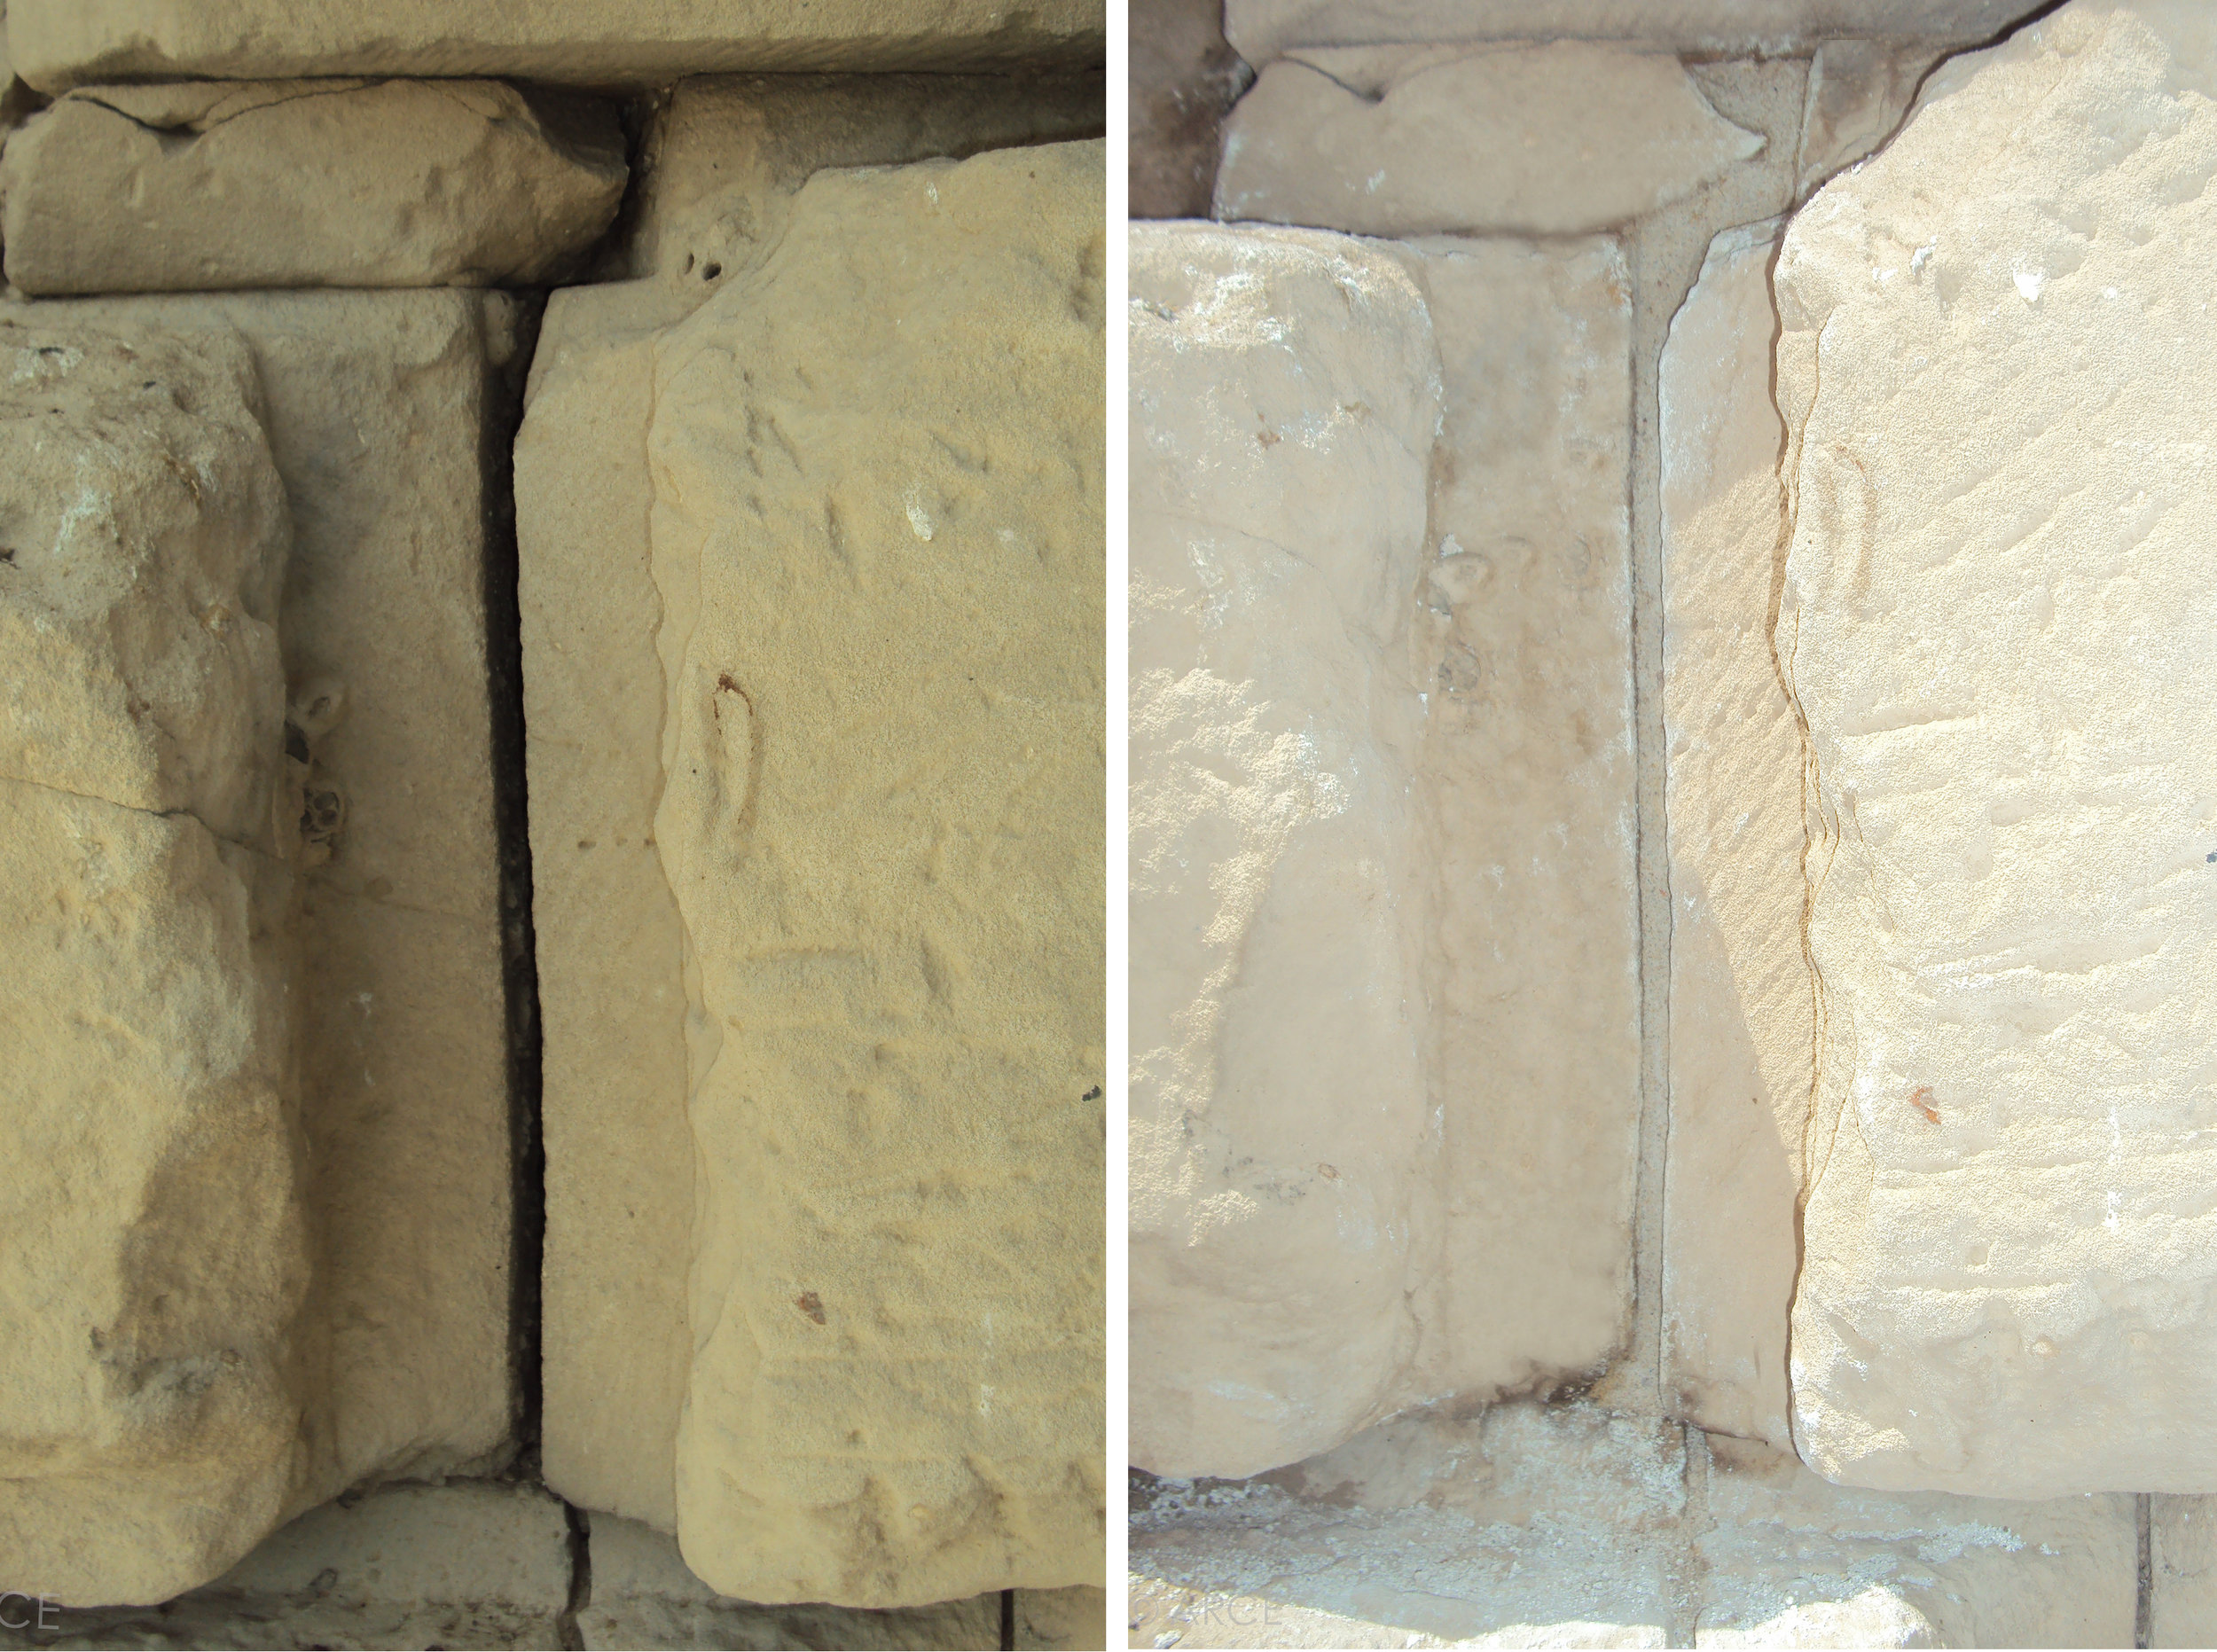  Detail of a large crack in the north facade before (left) and after (right) repointing.&nbsp;  Image © ARCE, 2012 